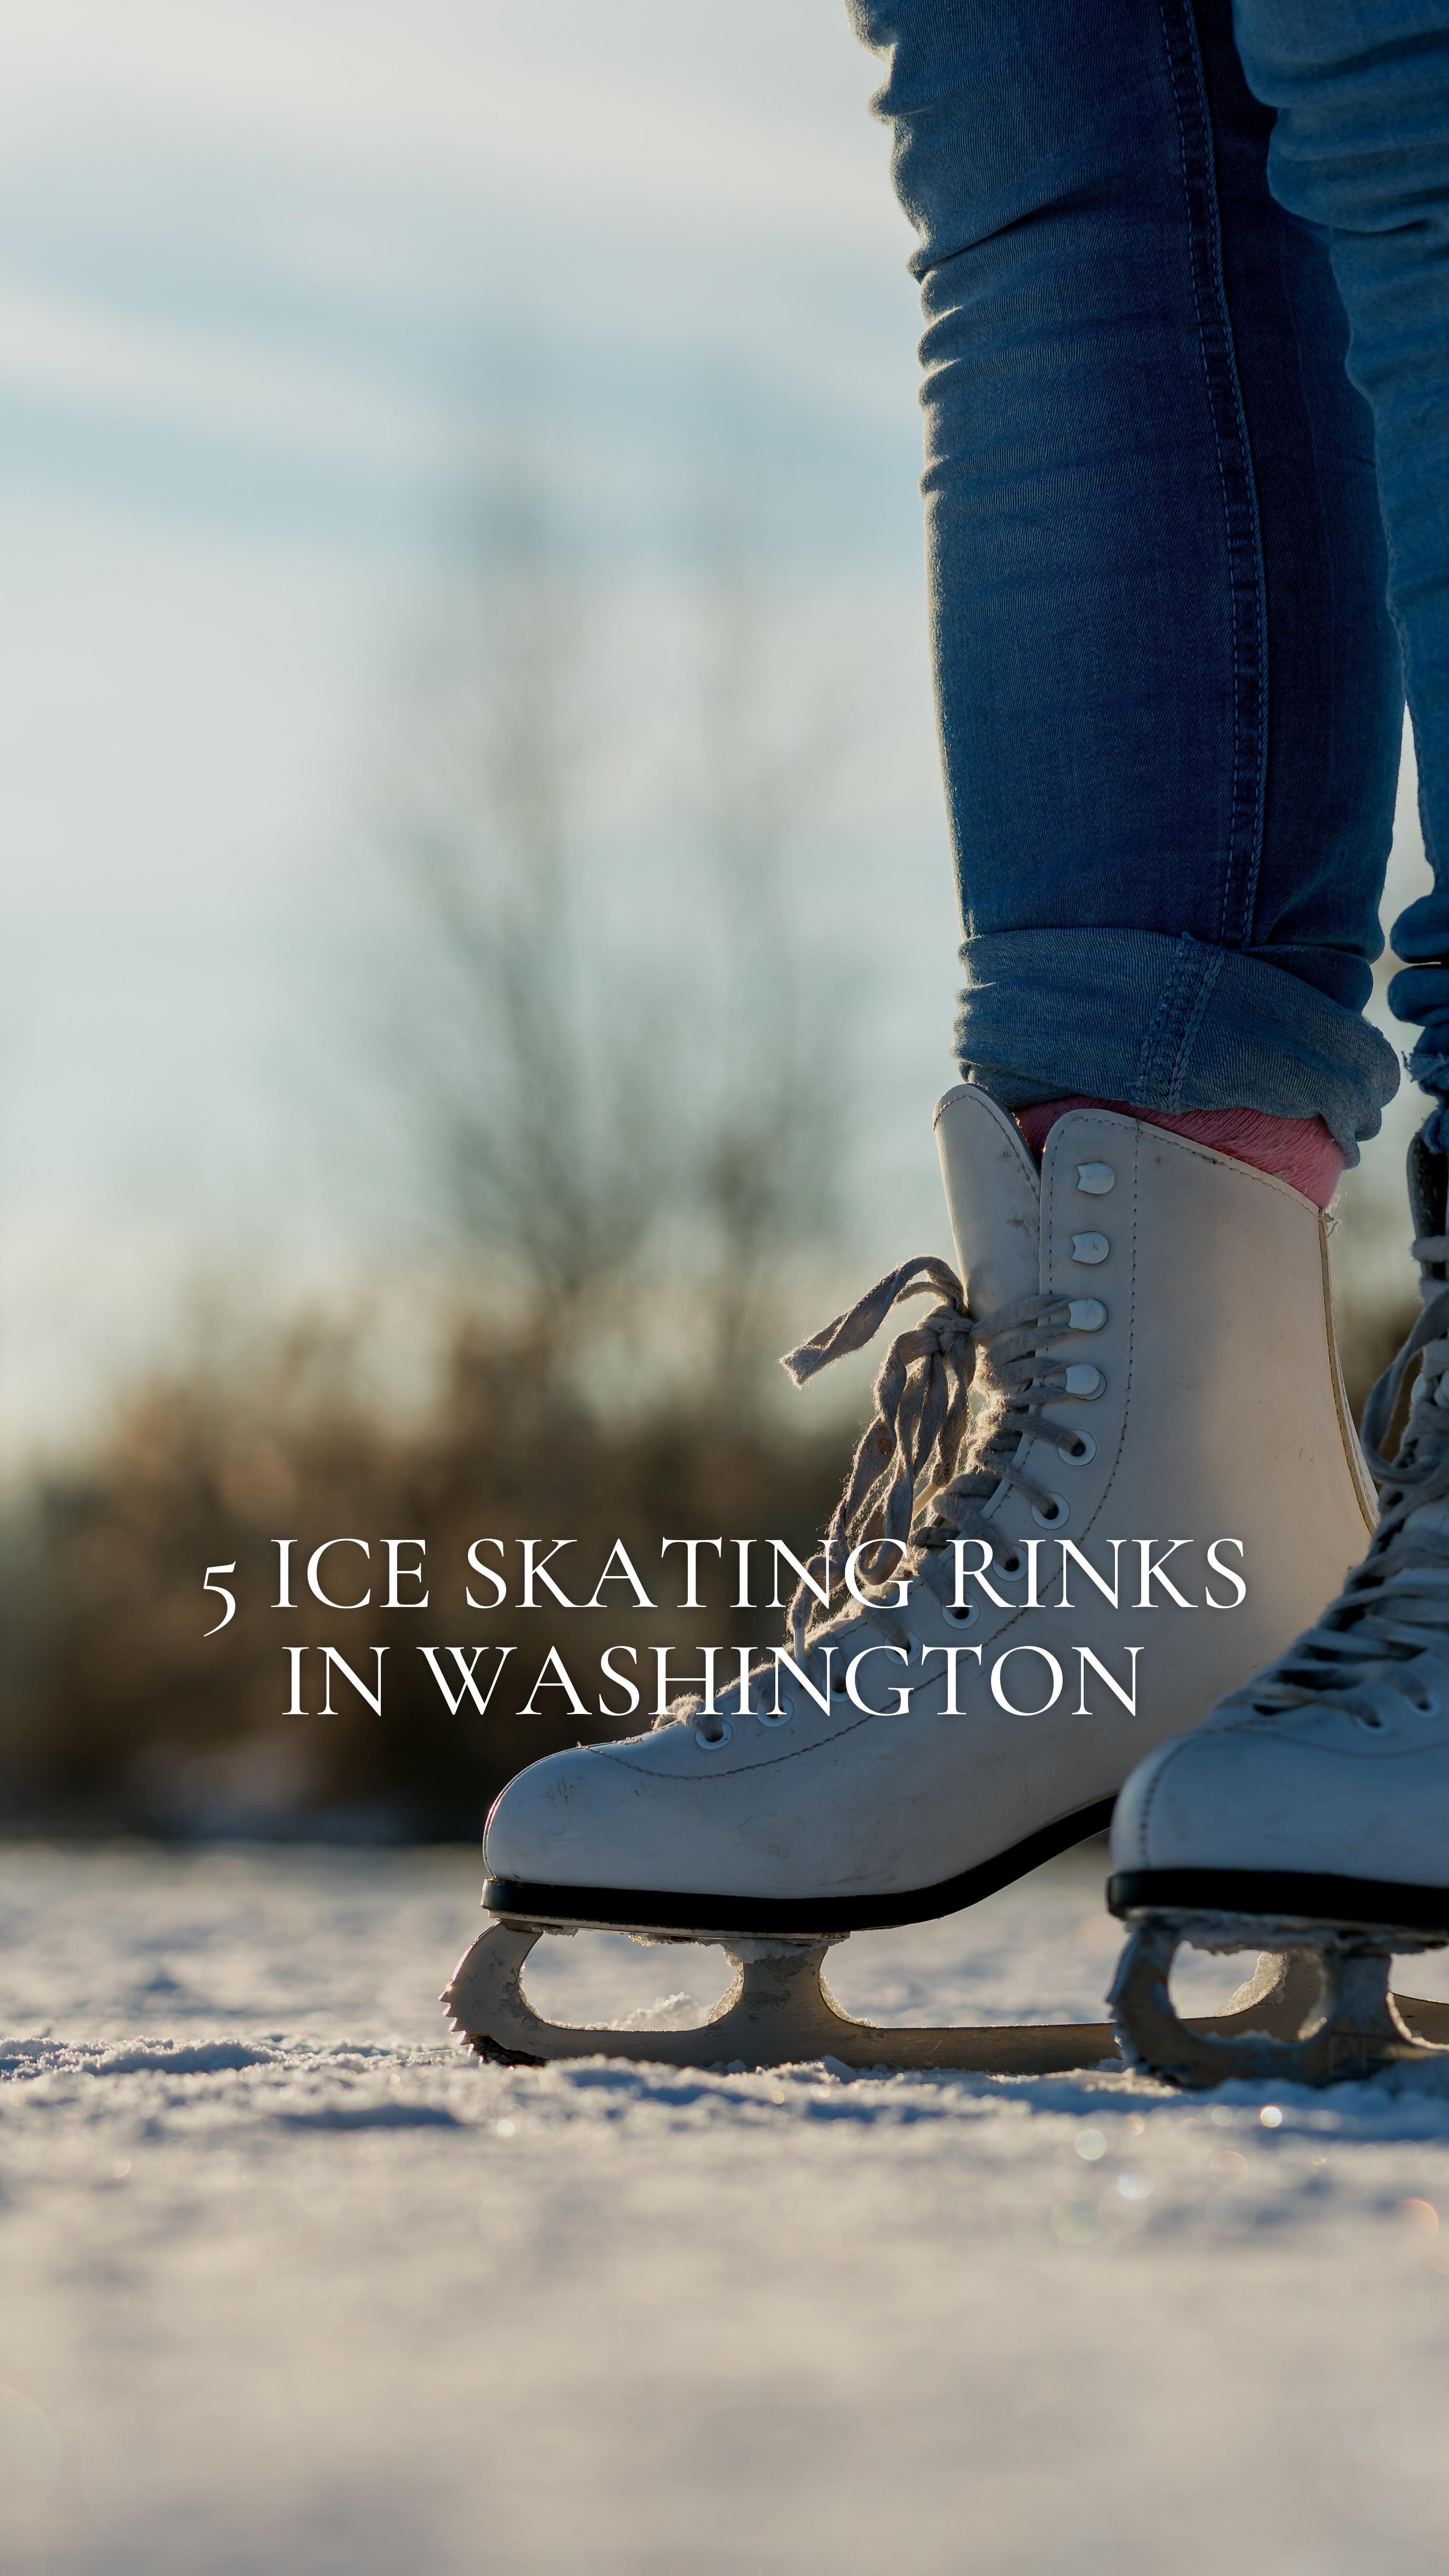 5 ICE SKATING RINKS IN WASHINGTON ⛸ Stock up on the hot chocolate, gloves and scarves and head to one of our top 5 ice skating rinks I’m Washington. Read the full article using the link in our bio.